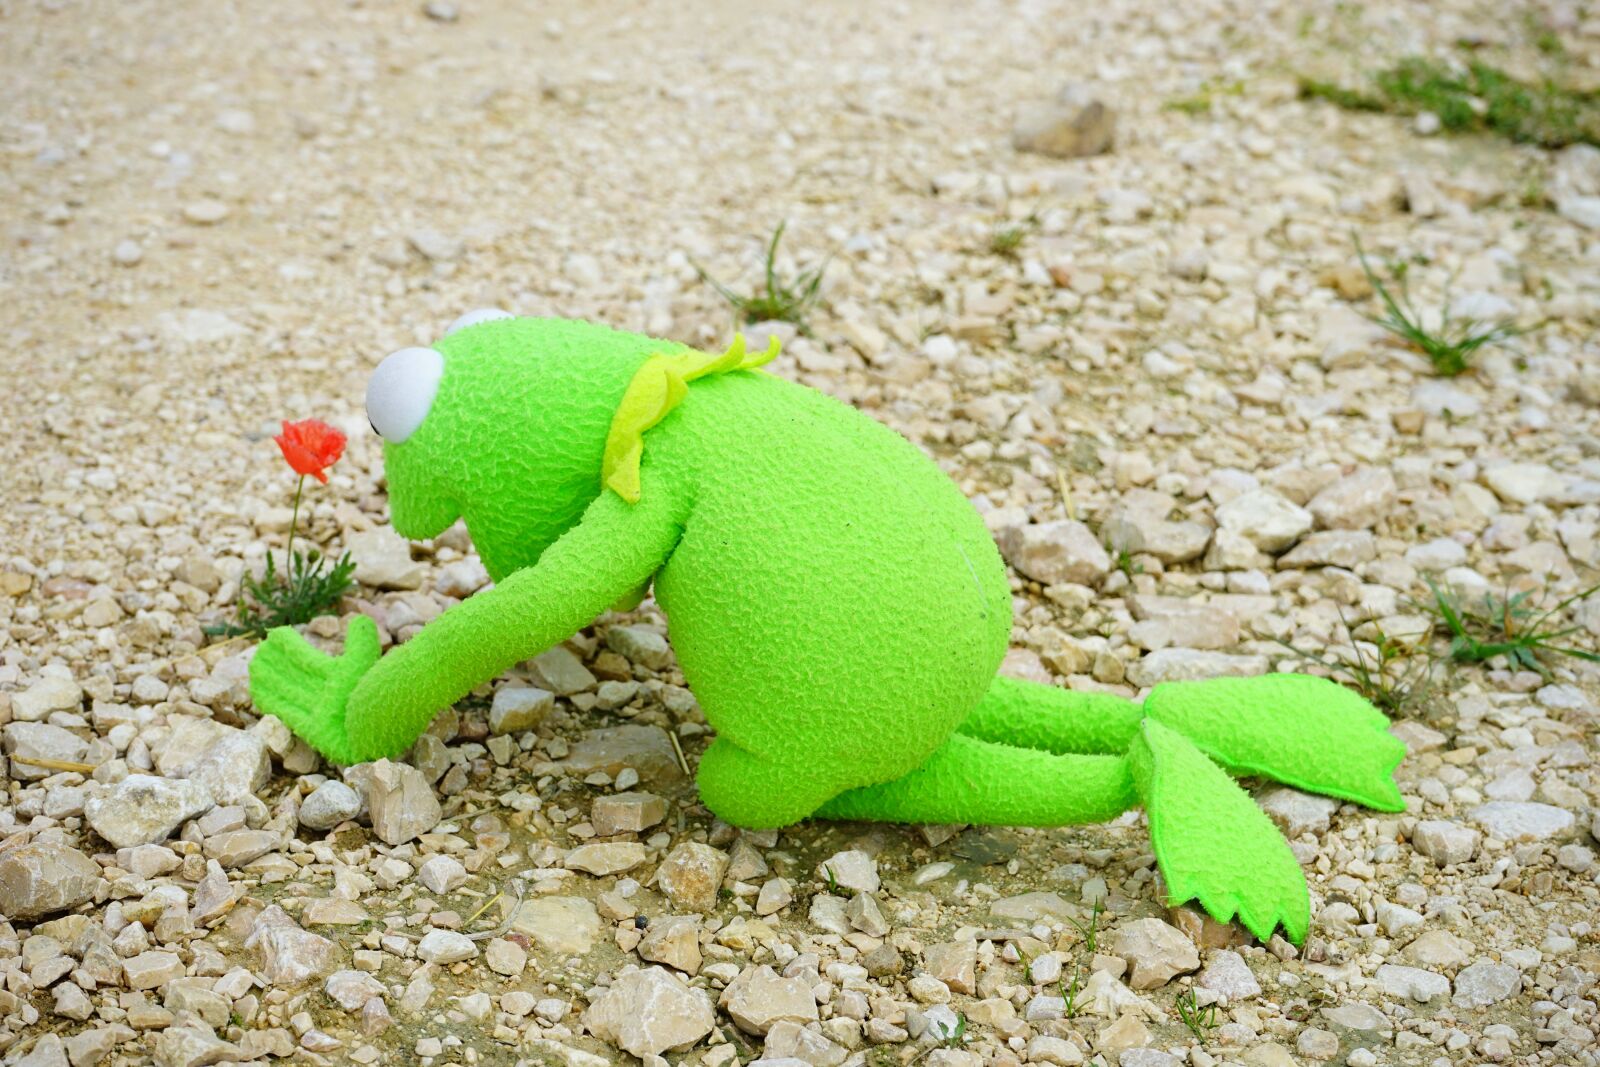 Sony a7 sample photo. Kermit, frog, hunger photography